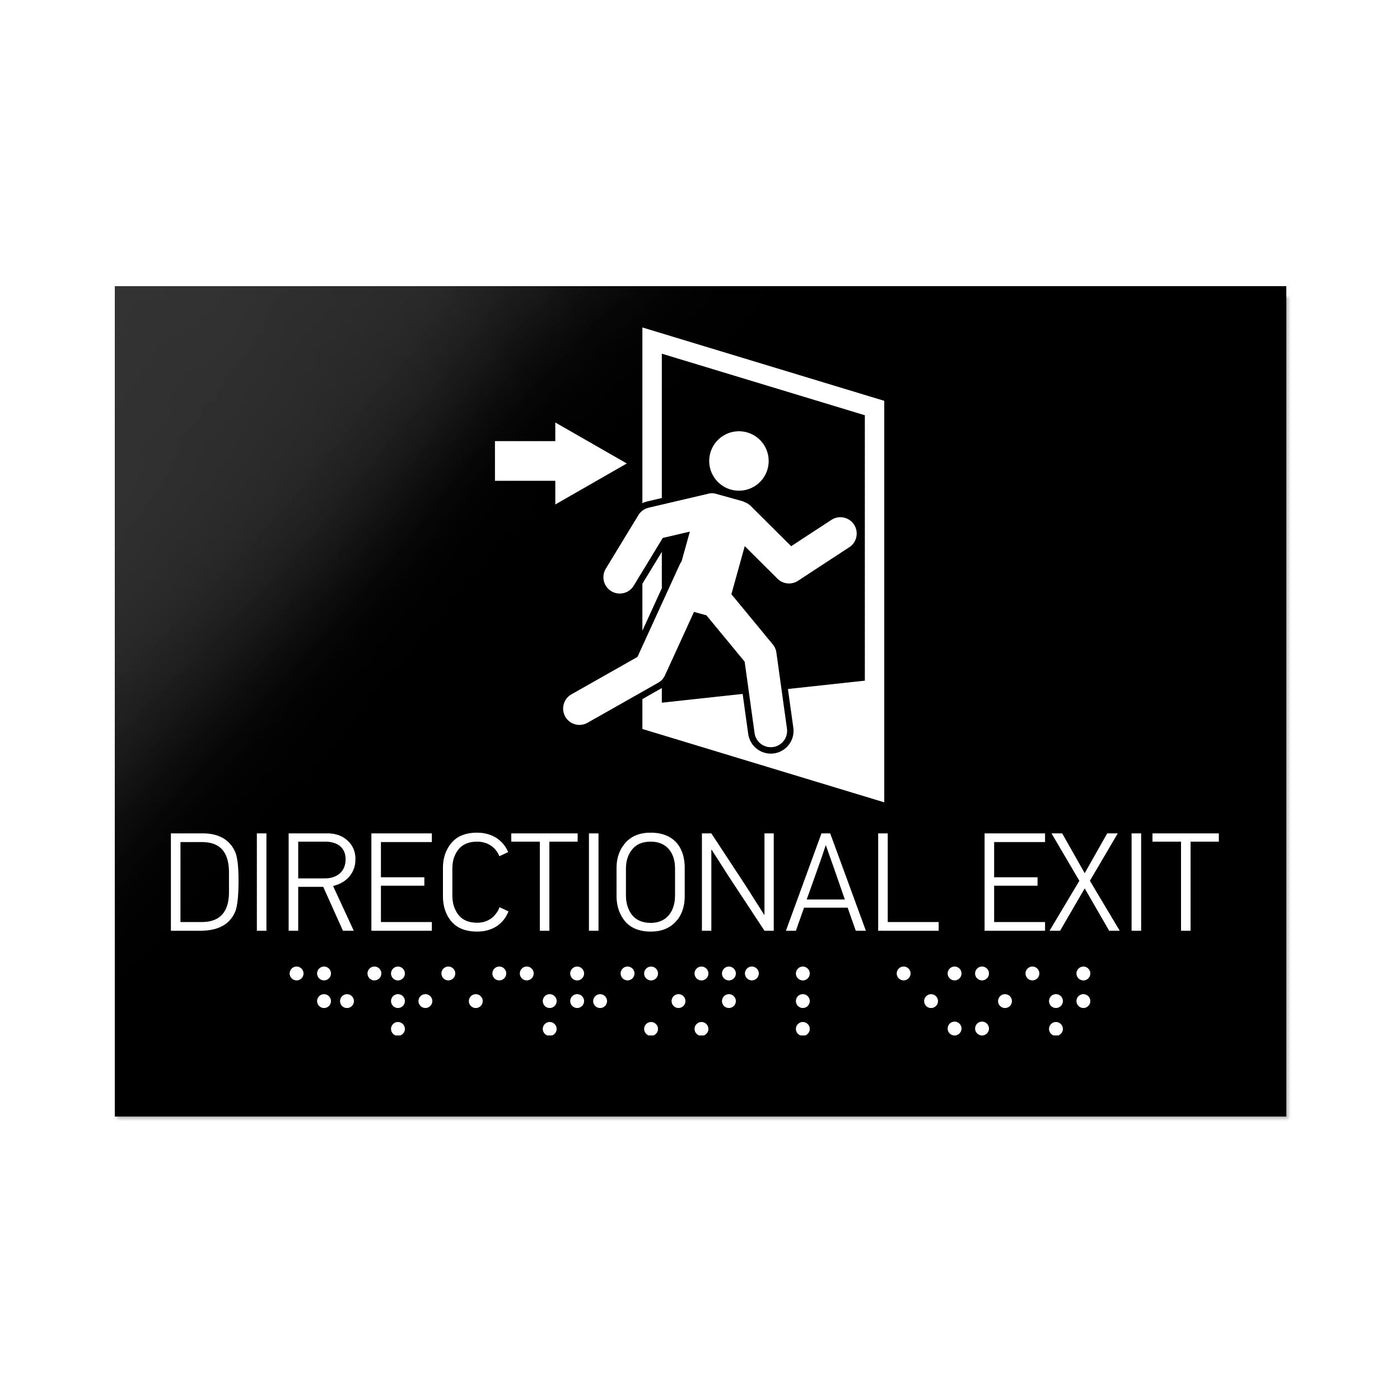 Information Signs - Directional Exit Door Sign Black Acrylic Whith Braille